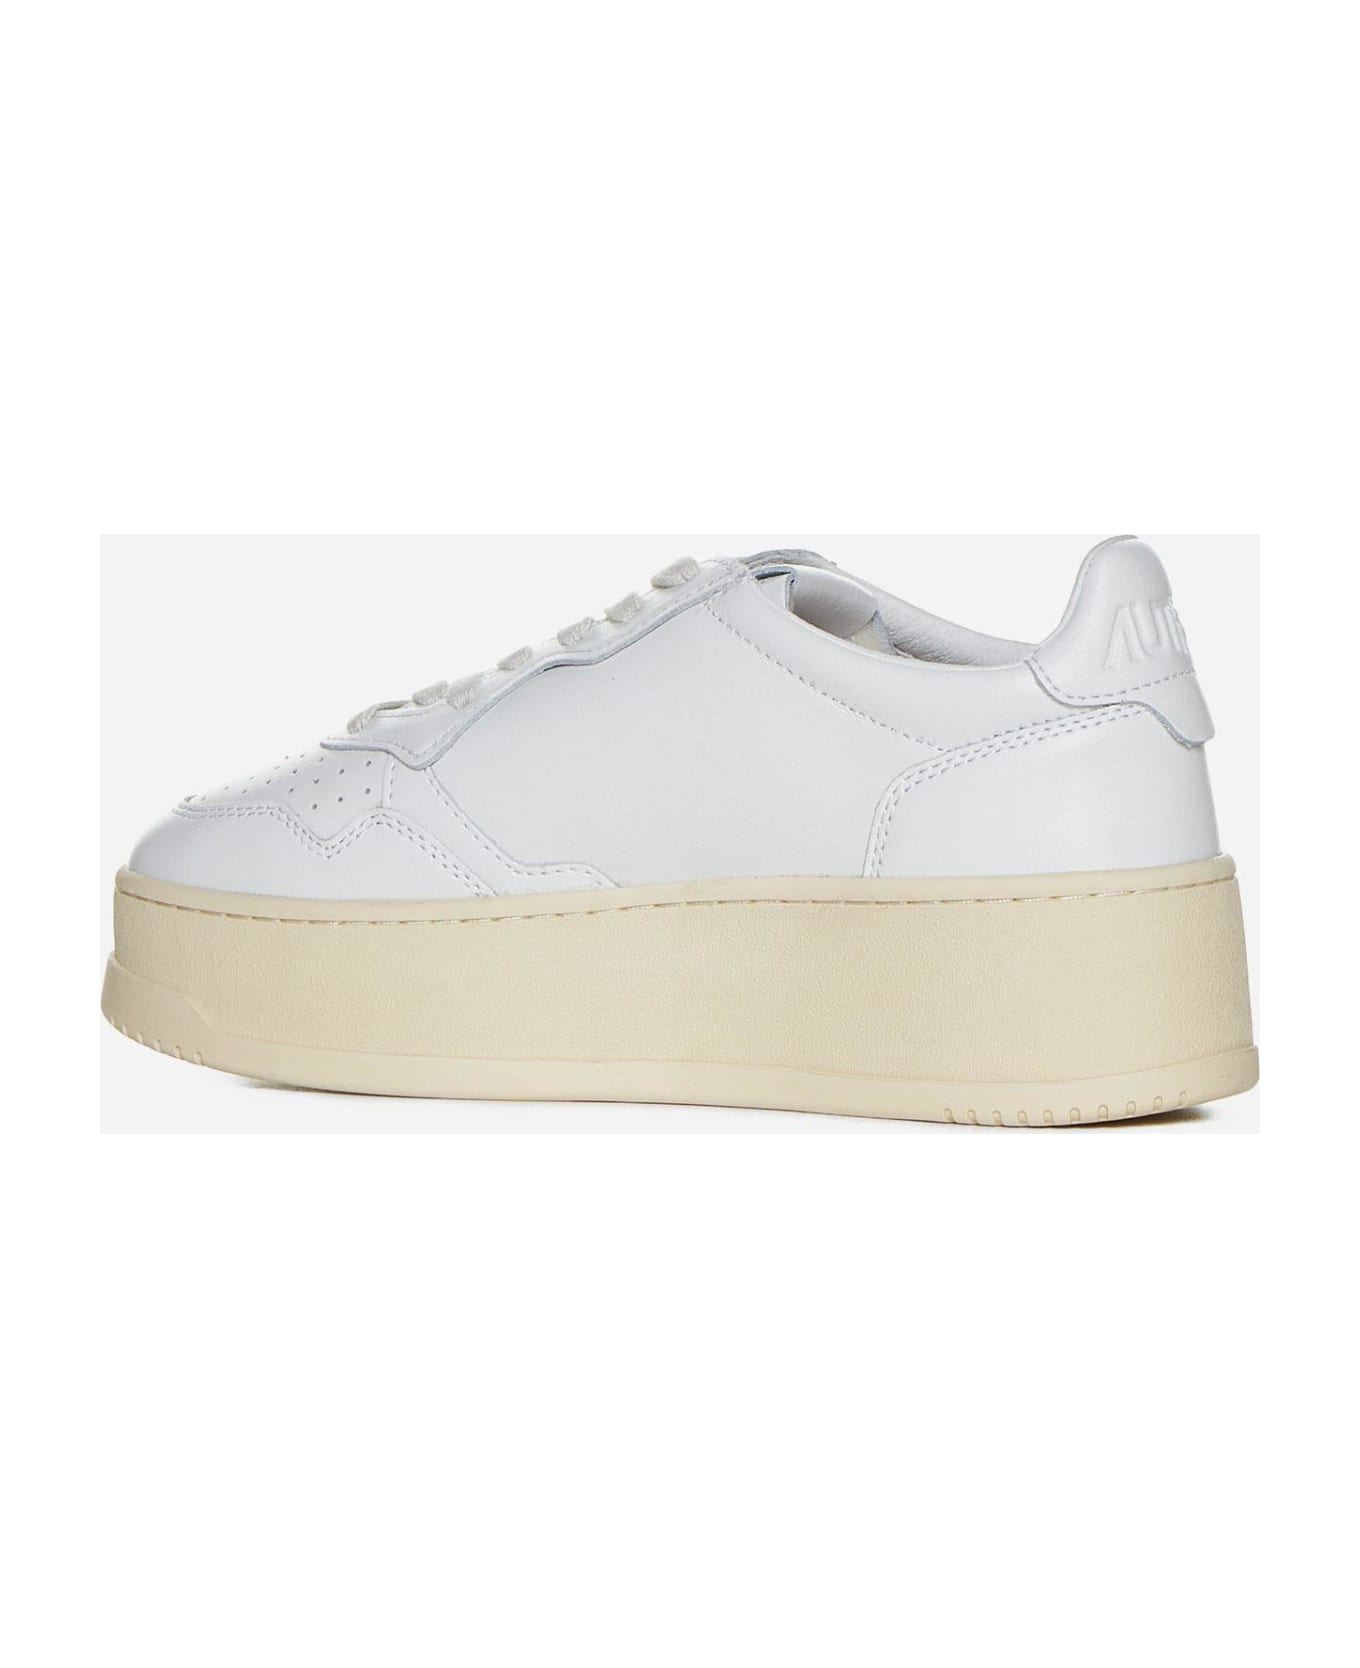 Autry Medalist Platform Leather Sneakers - White